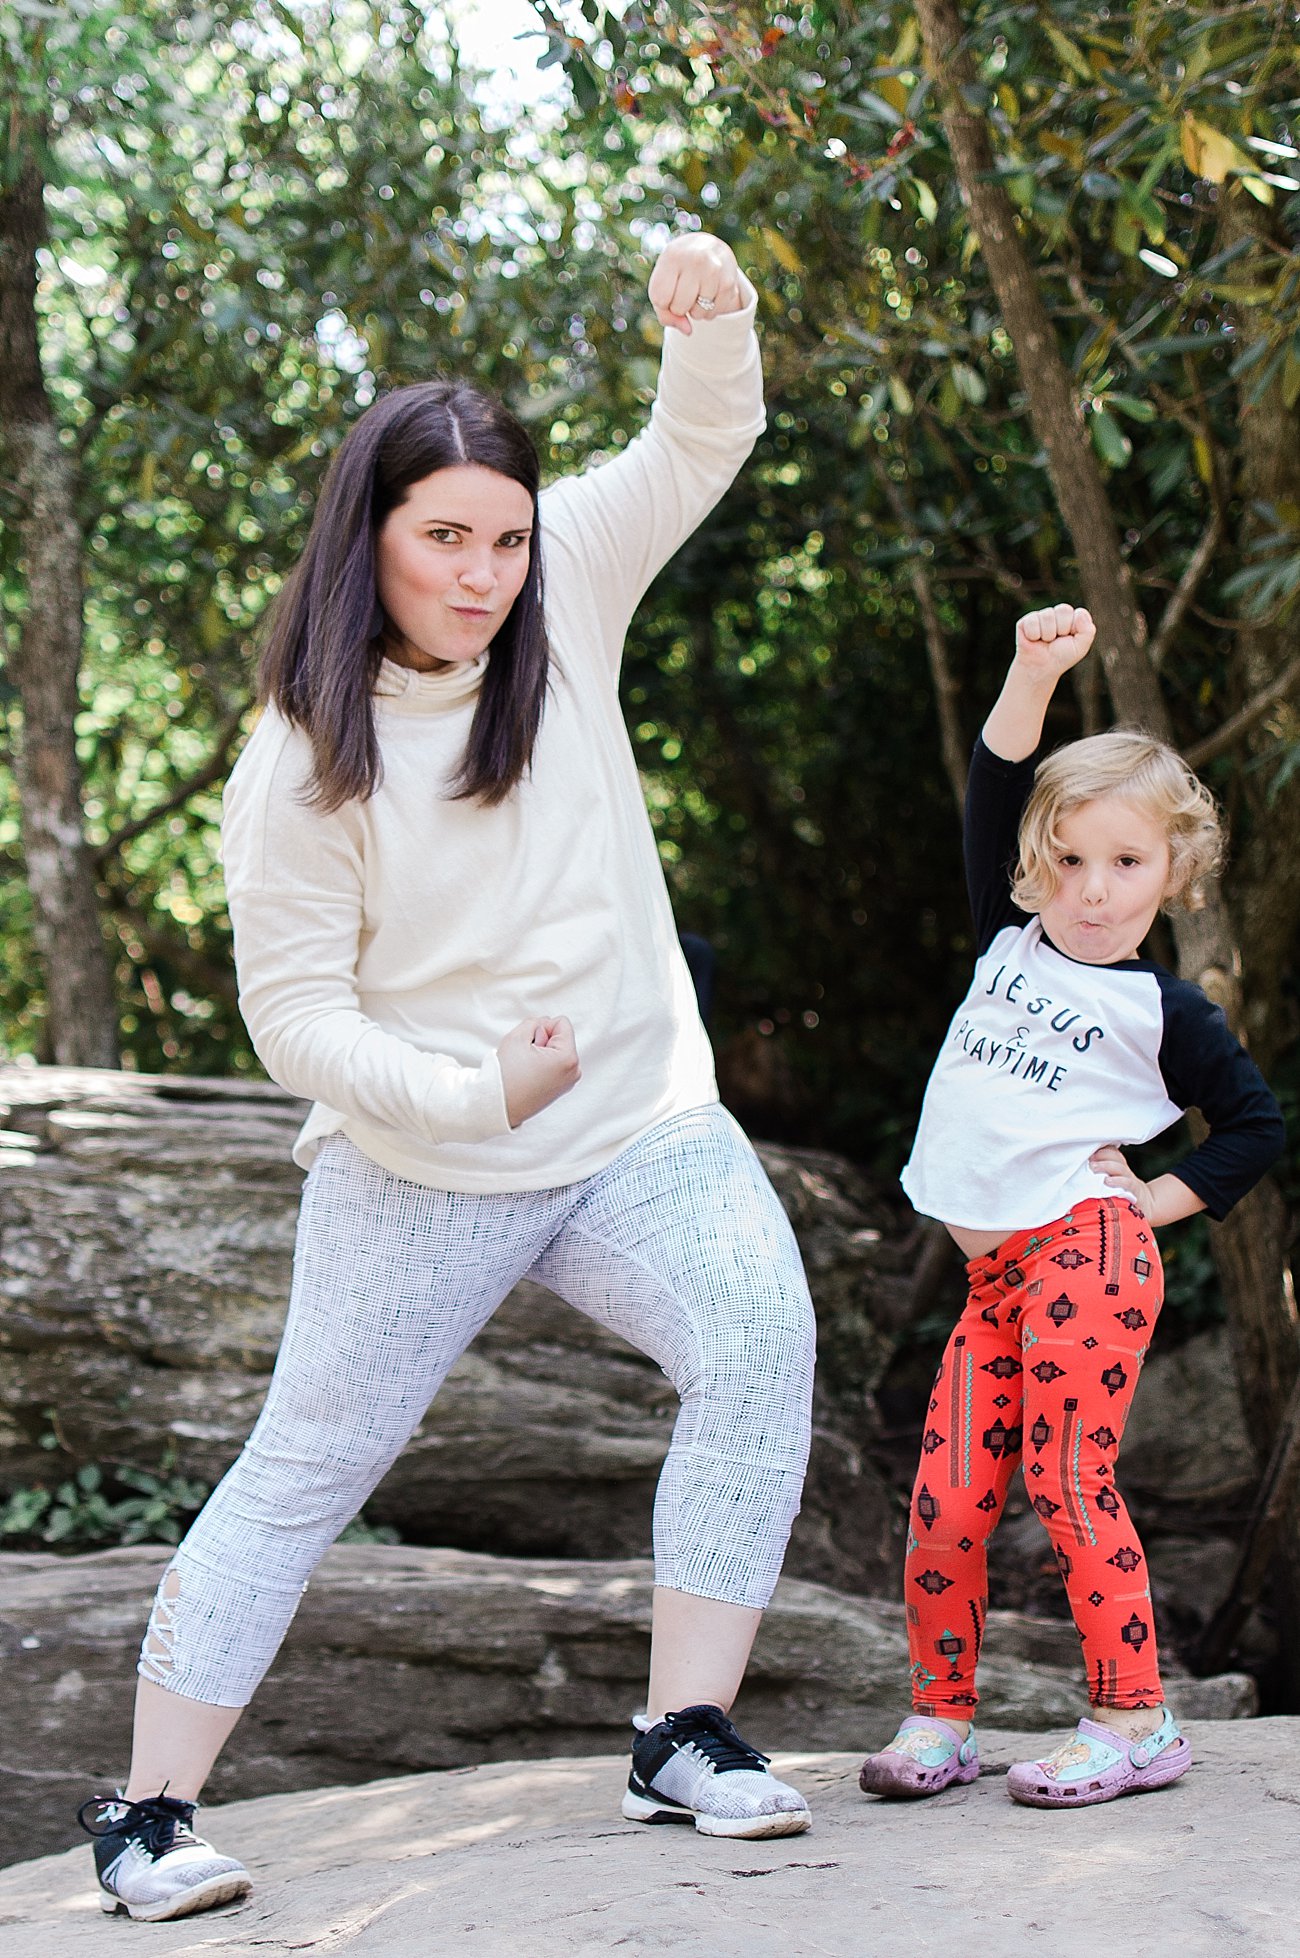 Hike Linville Falls, North Carolina - prAna Ethical and Sustainable Activewear - Ethical Fashion Blogger (12) - A Family Hike at Linville Falls, North Carolina by NC blogger Still Being Molly